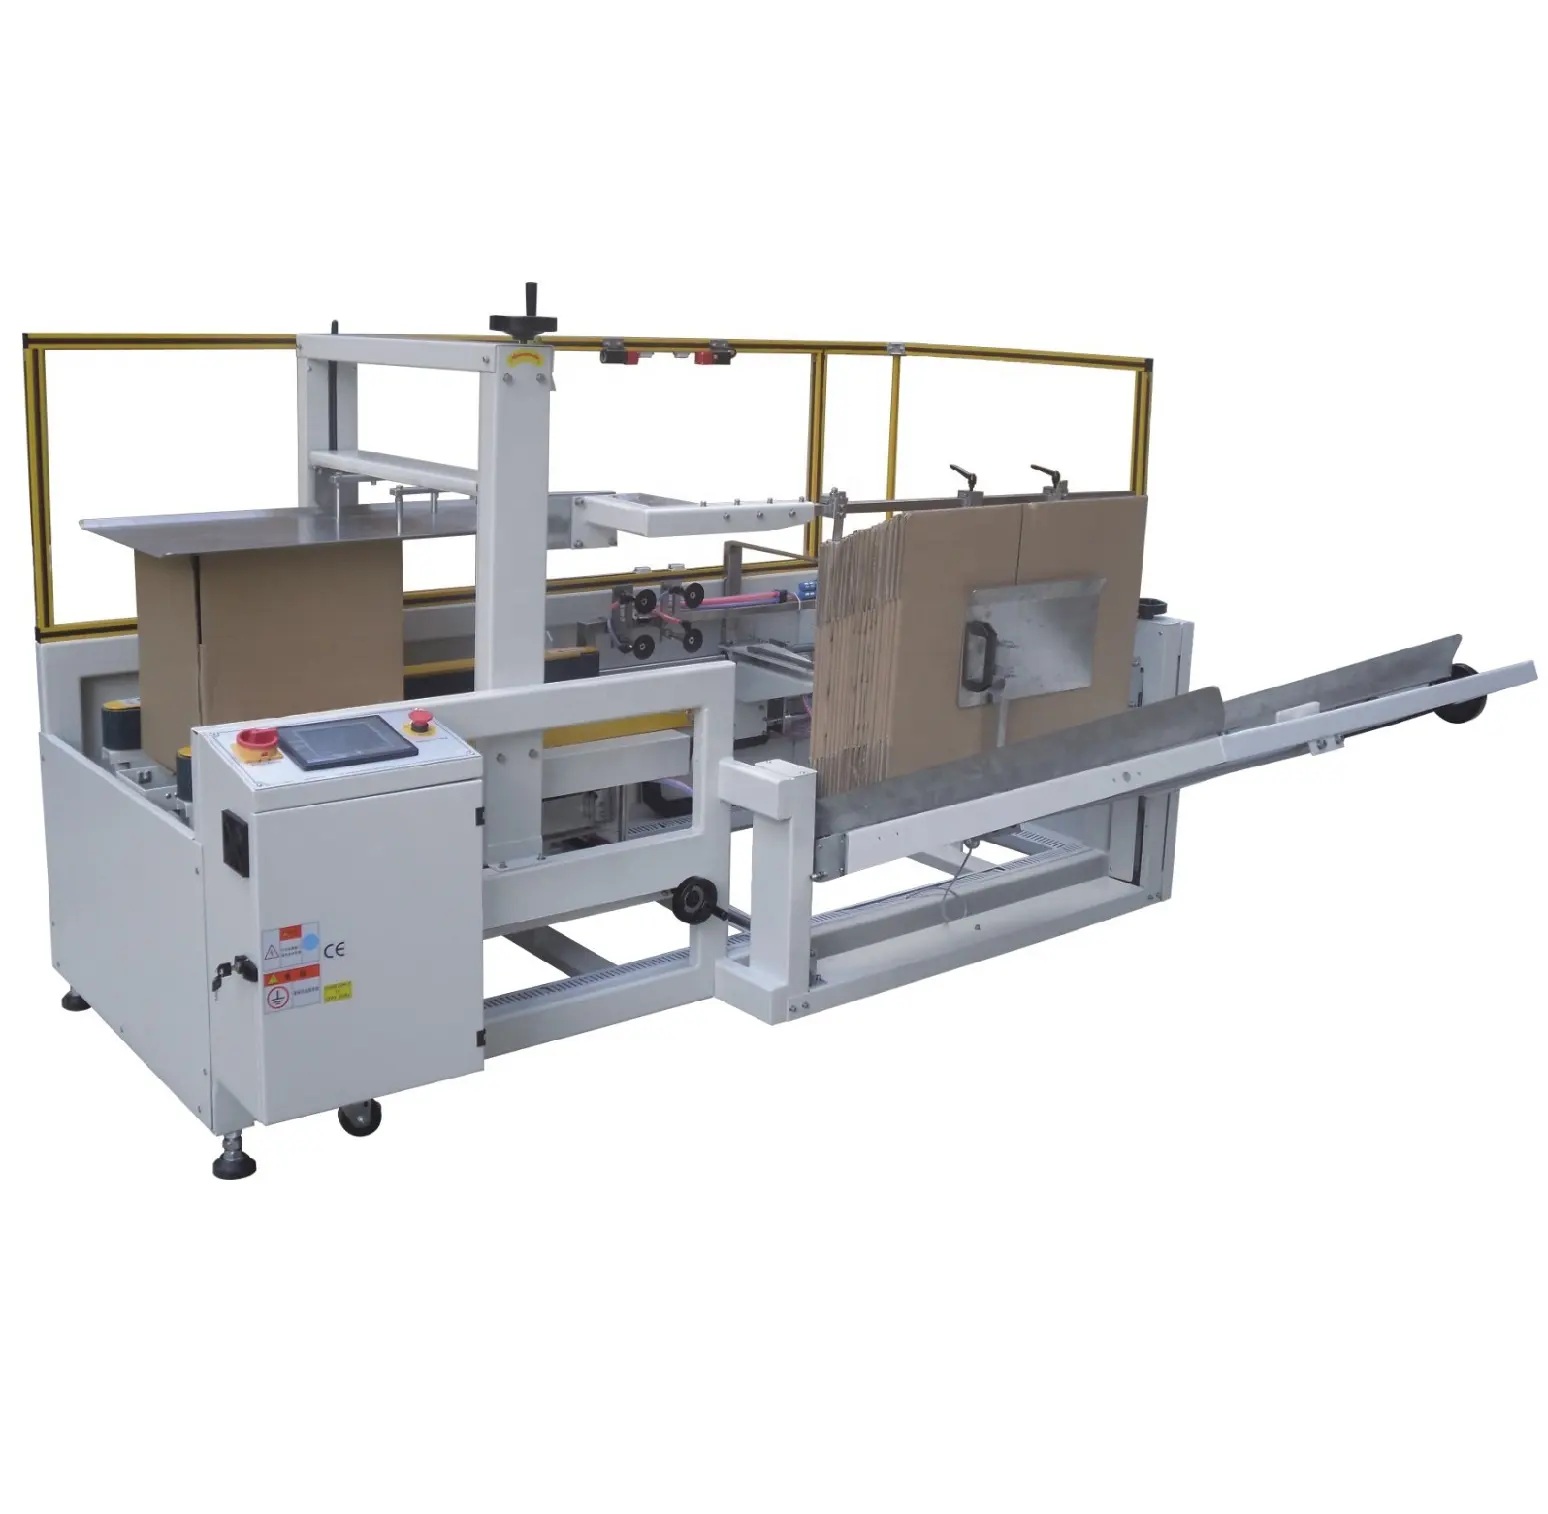 automatic erector inserter put bag in carton case packer packaging machine